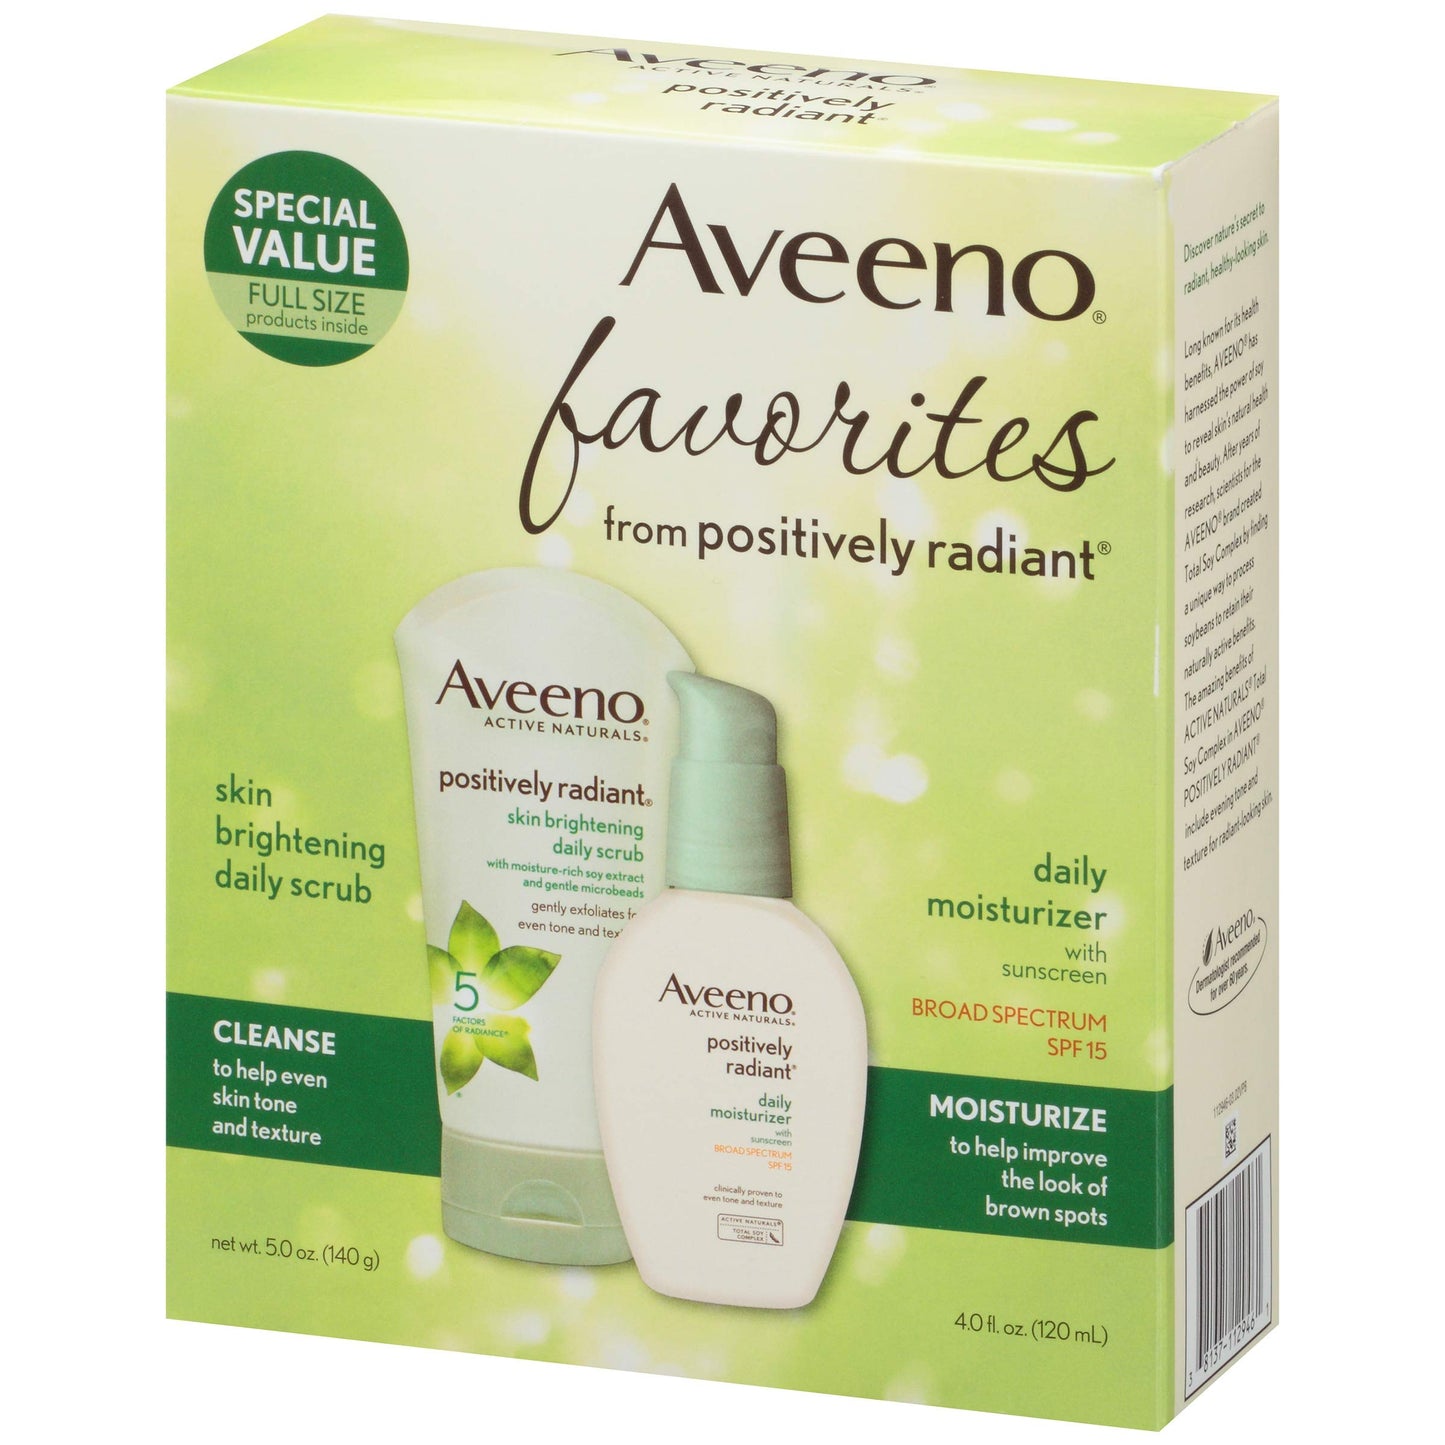 Aveeno Positively Radiant Morning Radiance Skin Care Gift Set with Daily Face Scrub & Moisturizer with SPF 15 Sunscreen, Helps Brightens Skin & Evens Tone, Non-Comedogenic & Hypoallergenic, Set of 2